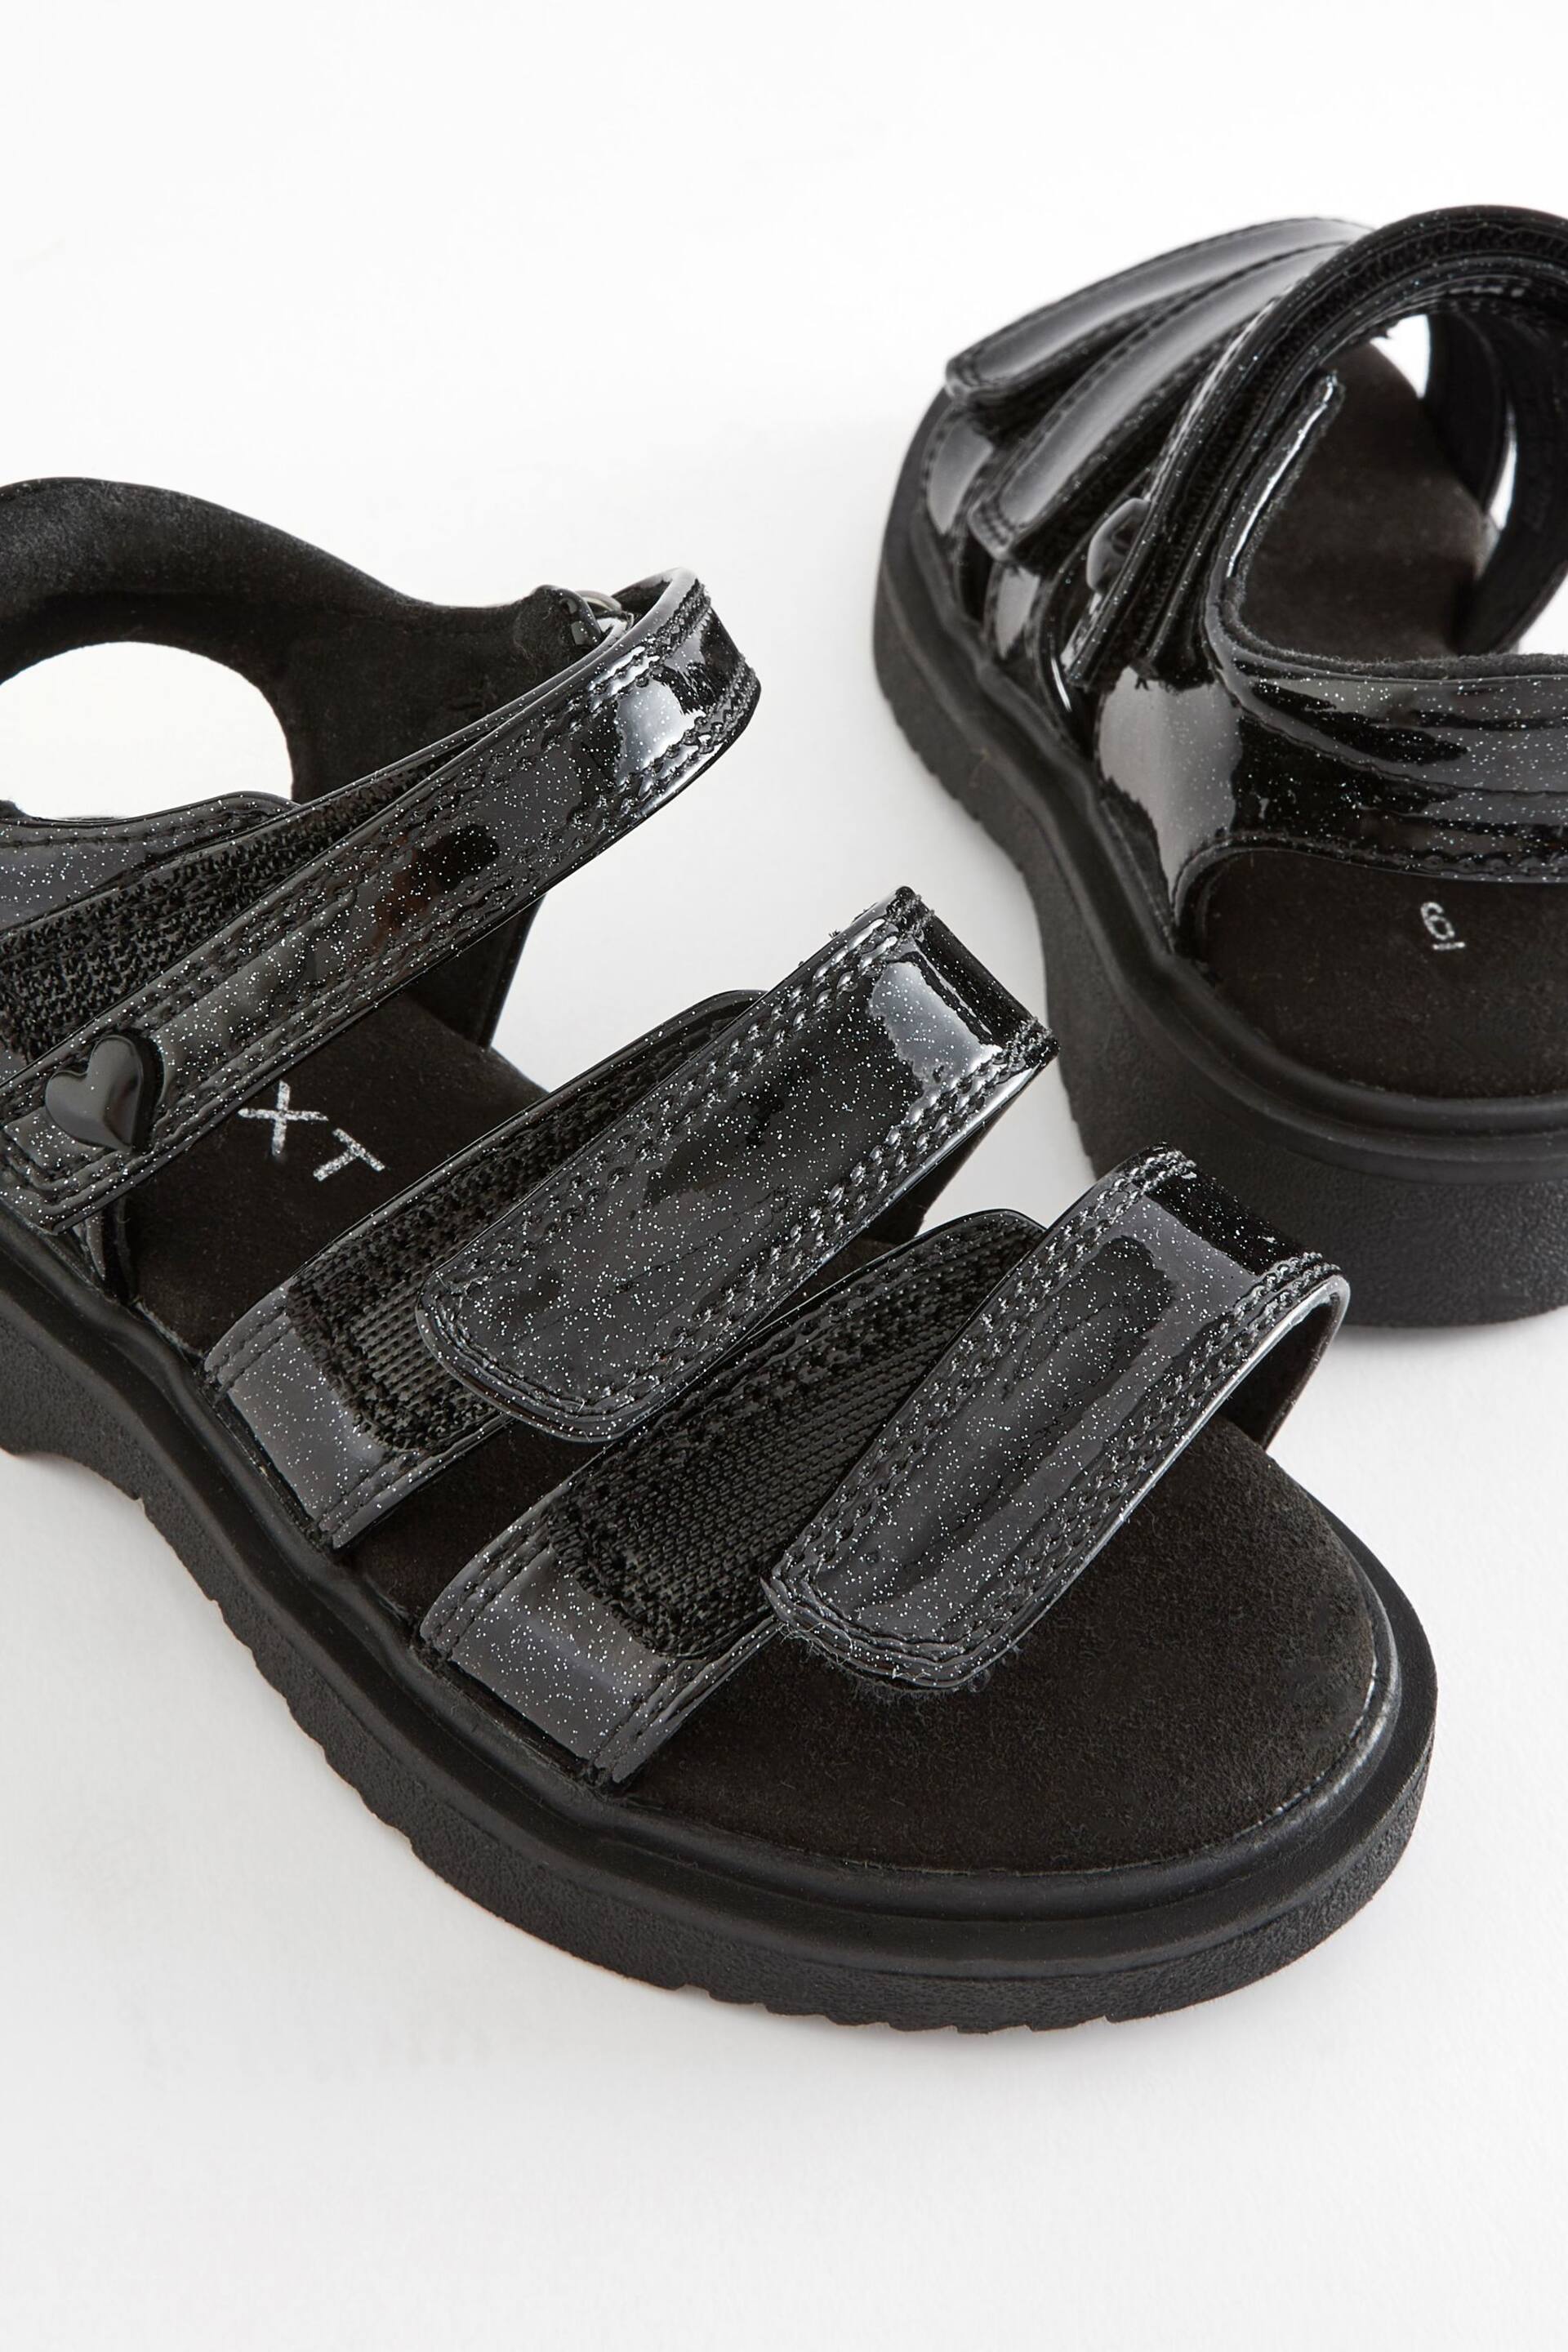 Black Chunky Sandals - Image 10 of 11